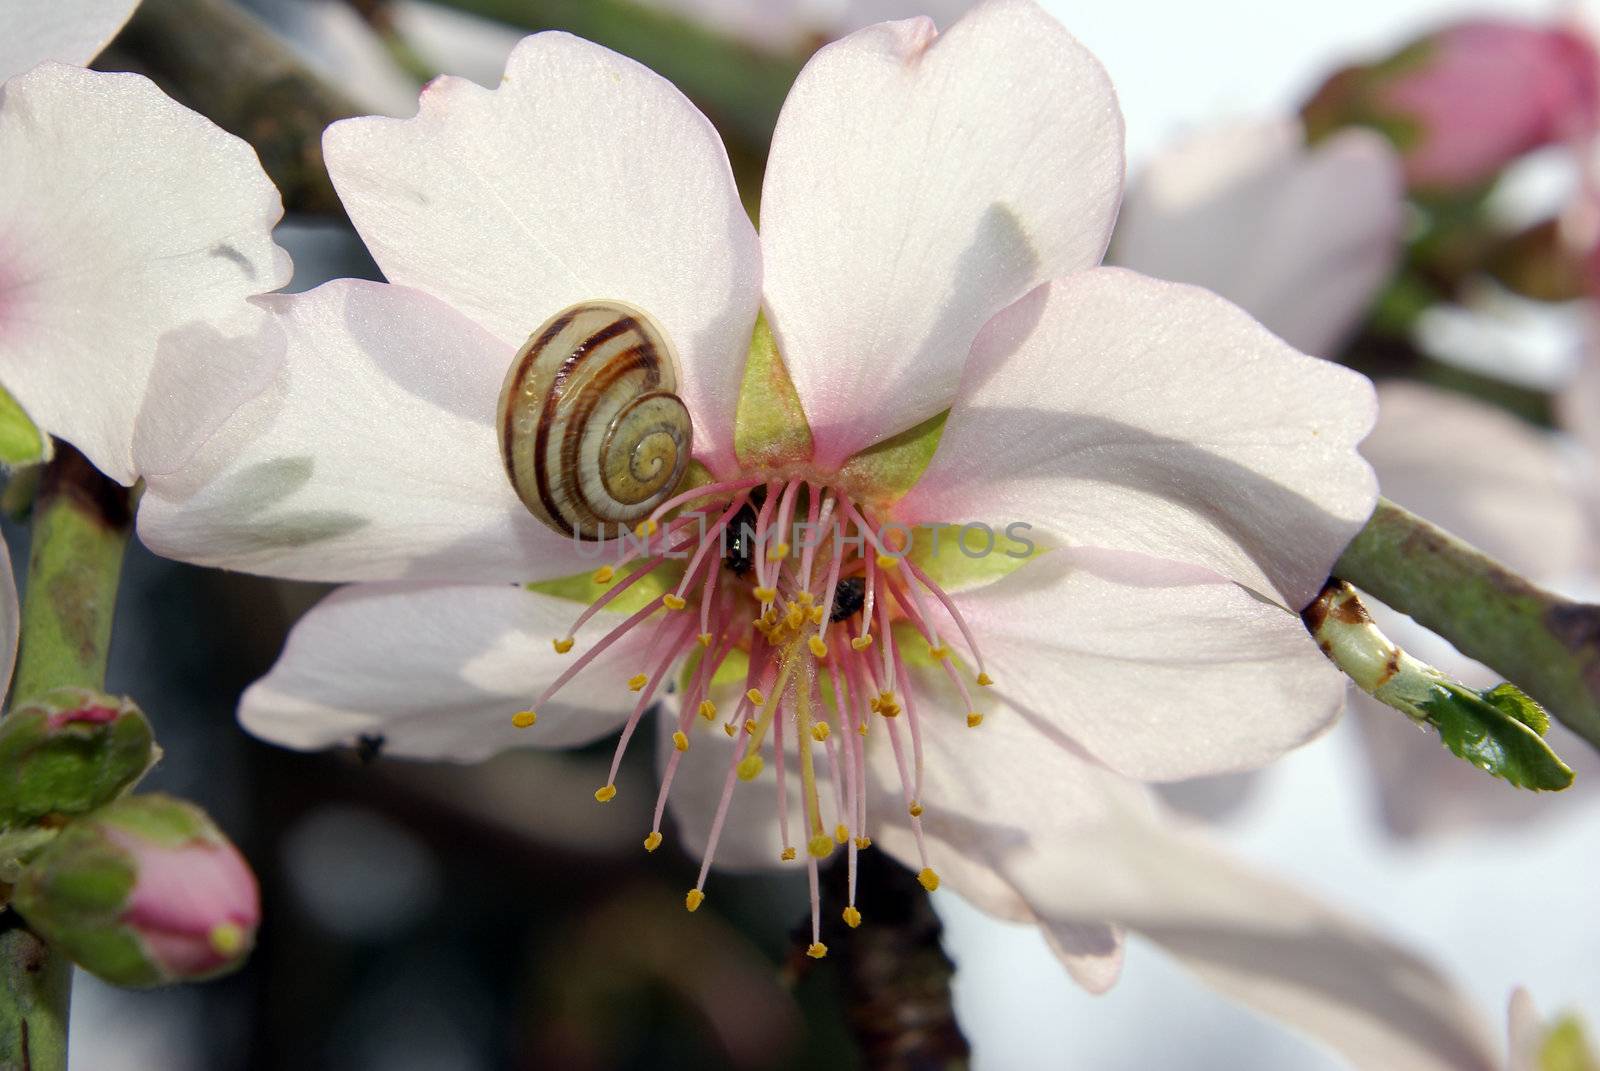 Snail On An Almond Blossom by calexica